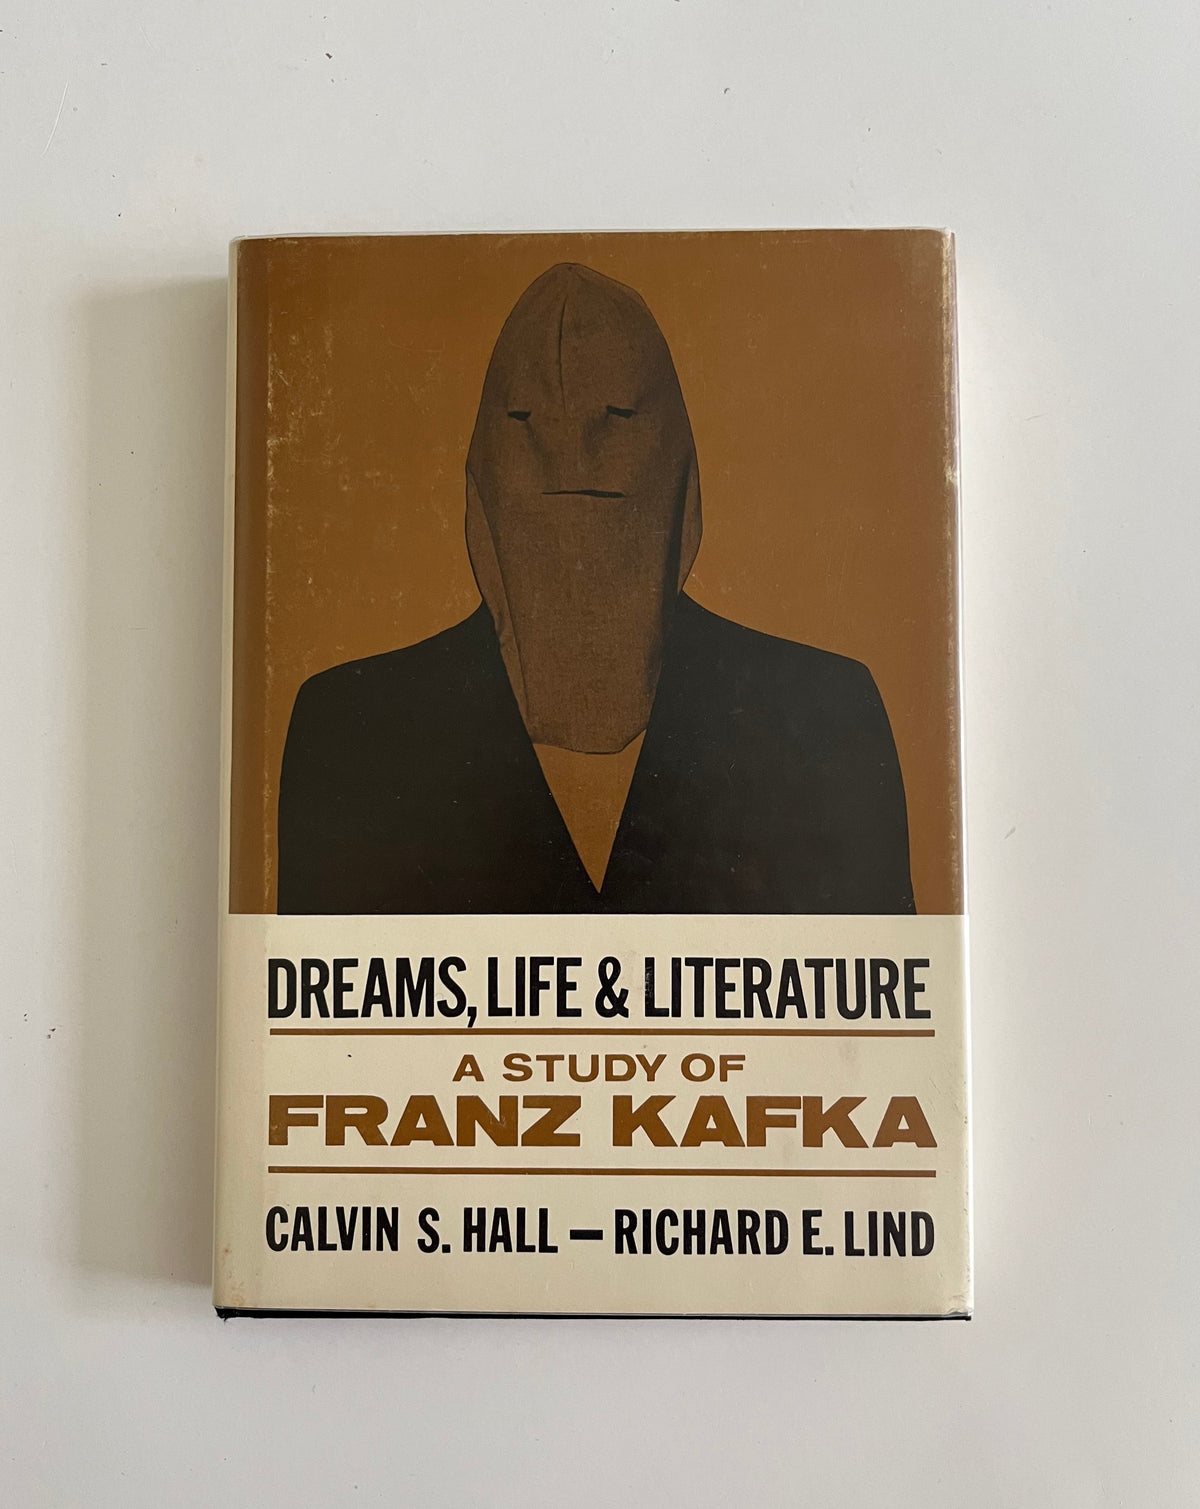 Dreams, Life &amp; Literature: A Study of Franz Kafka by Calvin S. Hall and Richard E. Lind